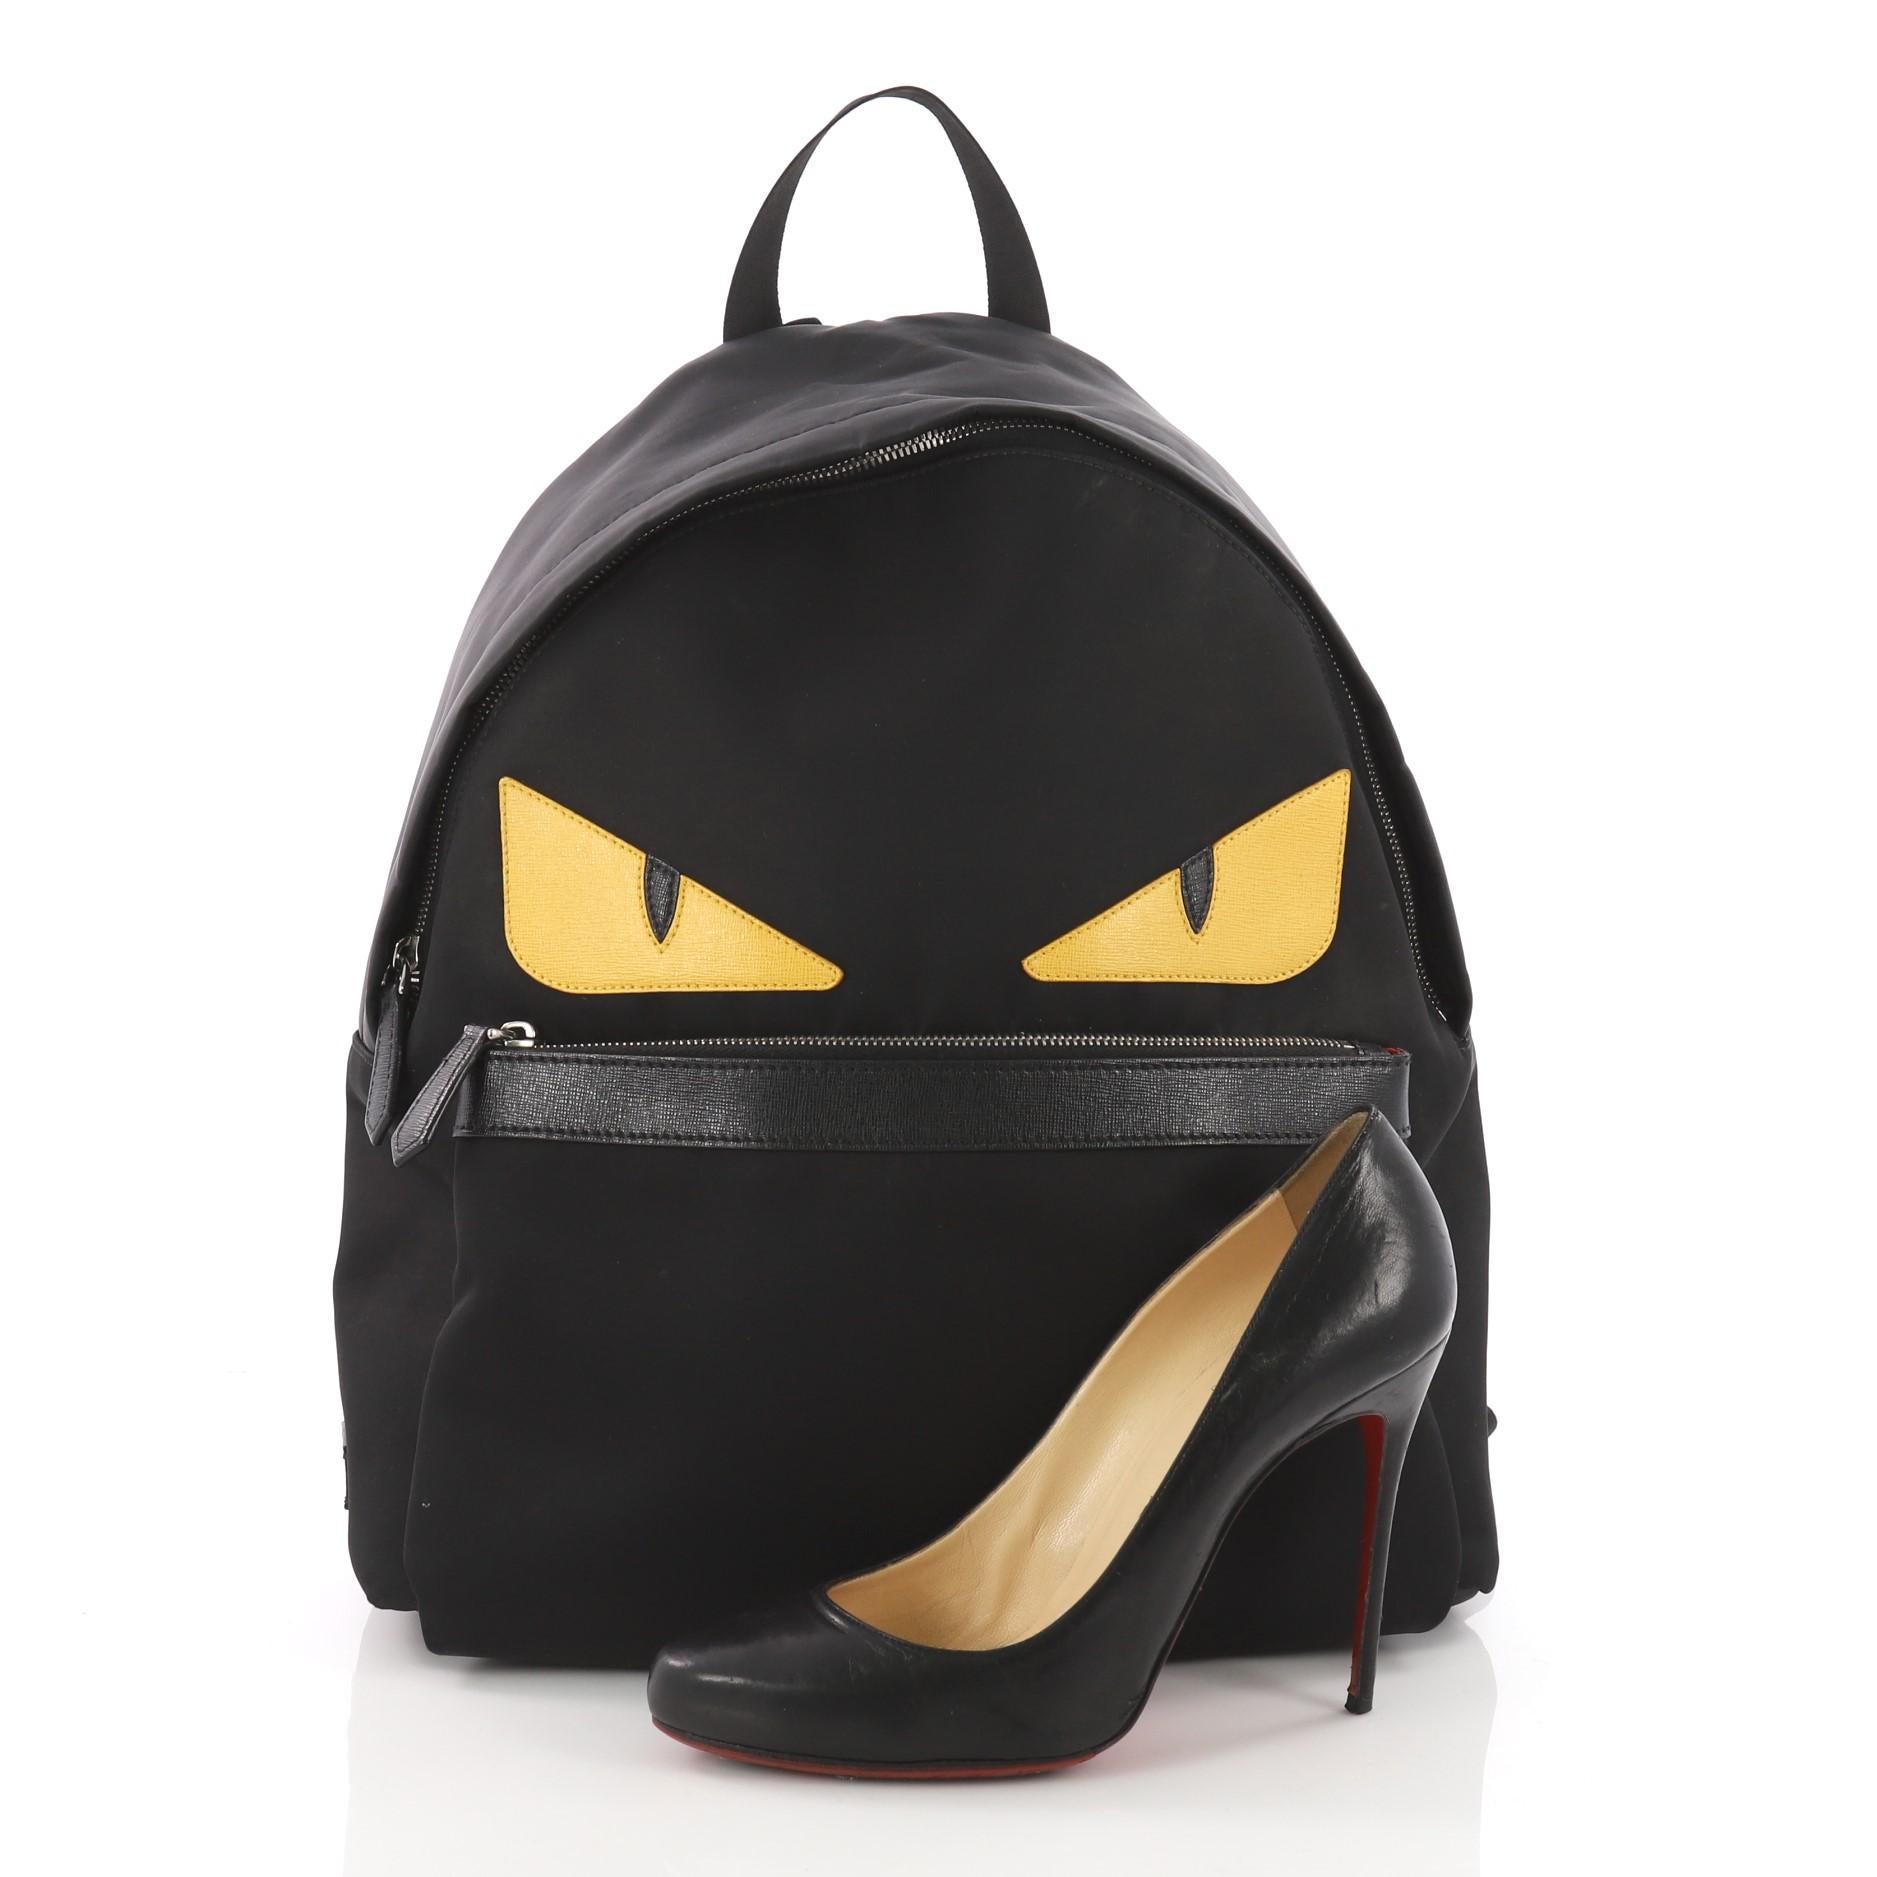 This authentic Fendi Monster Backpack Nylon Large balances a luxurious, playful style made for on-the-go fashionistas. Crafted from black nylon, this backpack features monster eye applique design, a flat top handle, padded adjustable shoulder